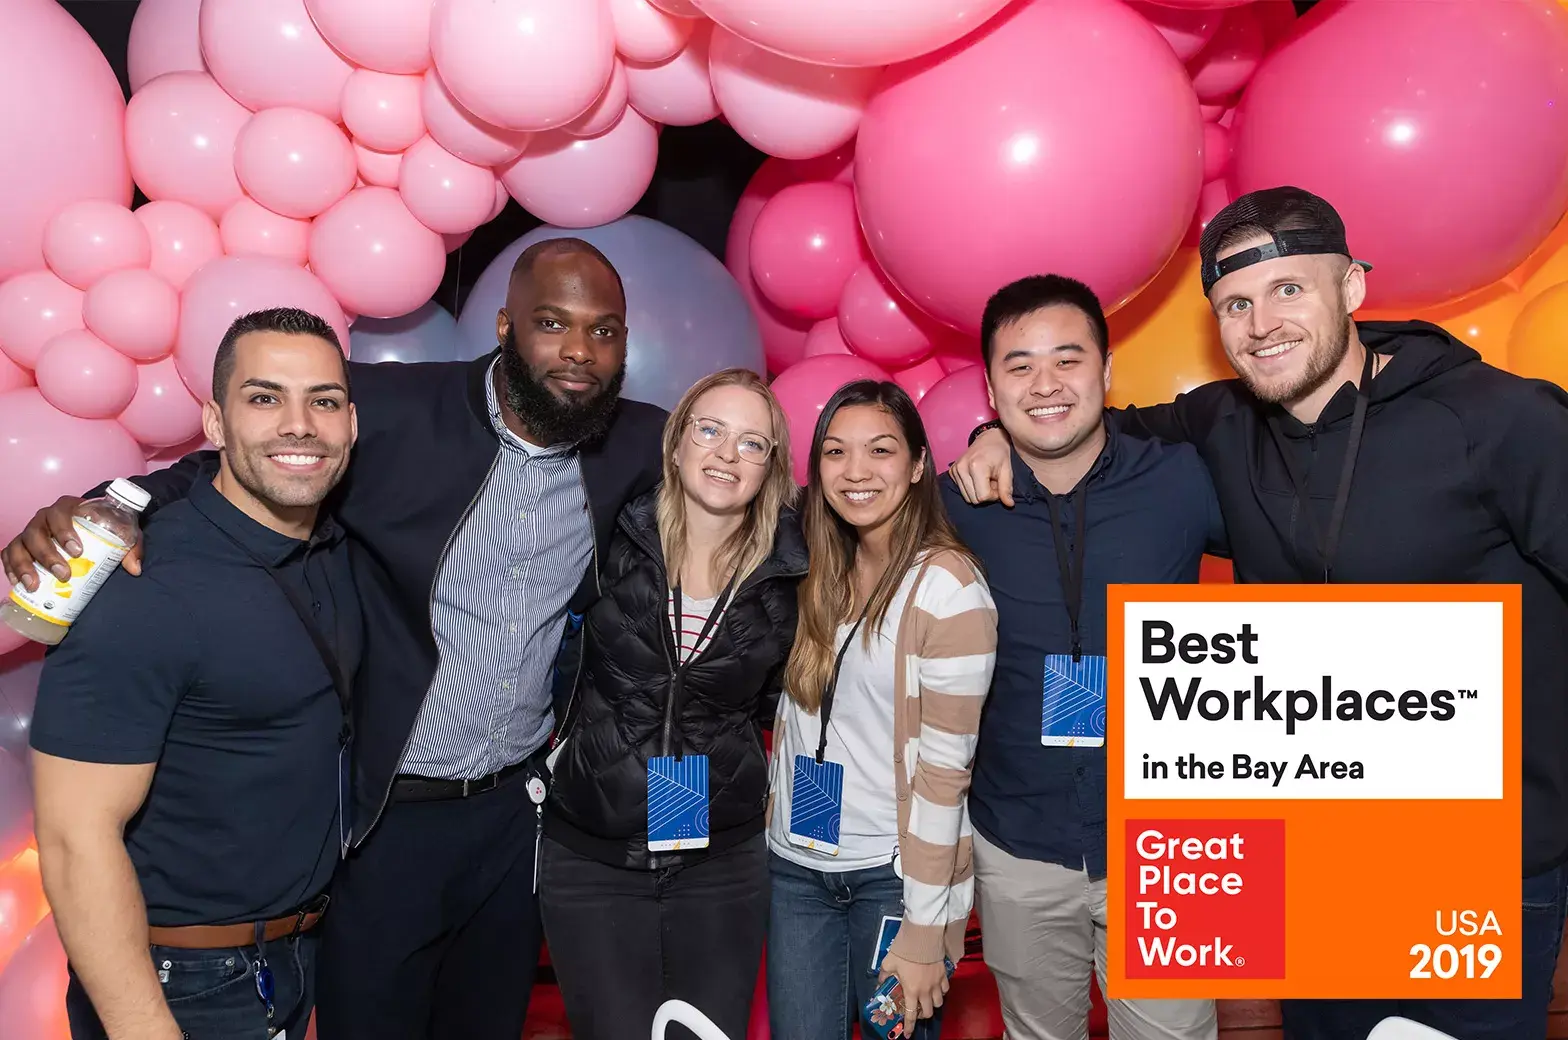 Asana is the Best Workplace in the Bay Area: Here’s why article banner image